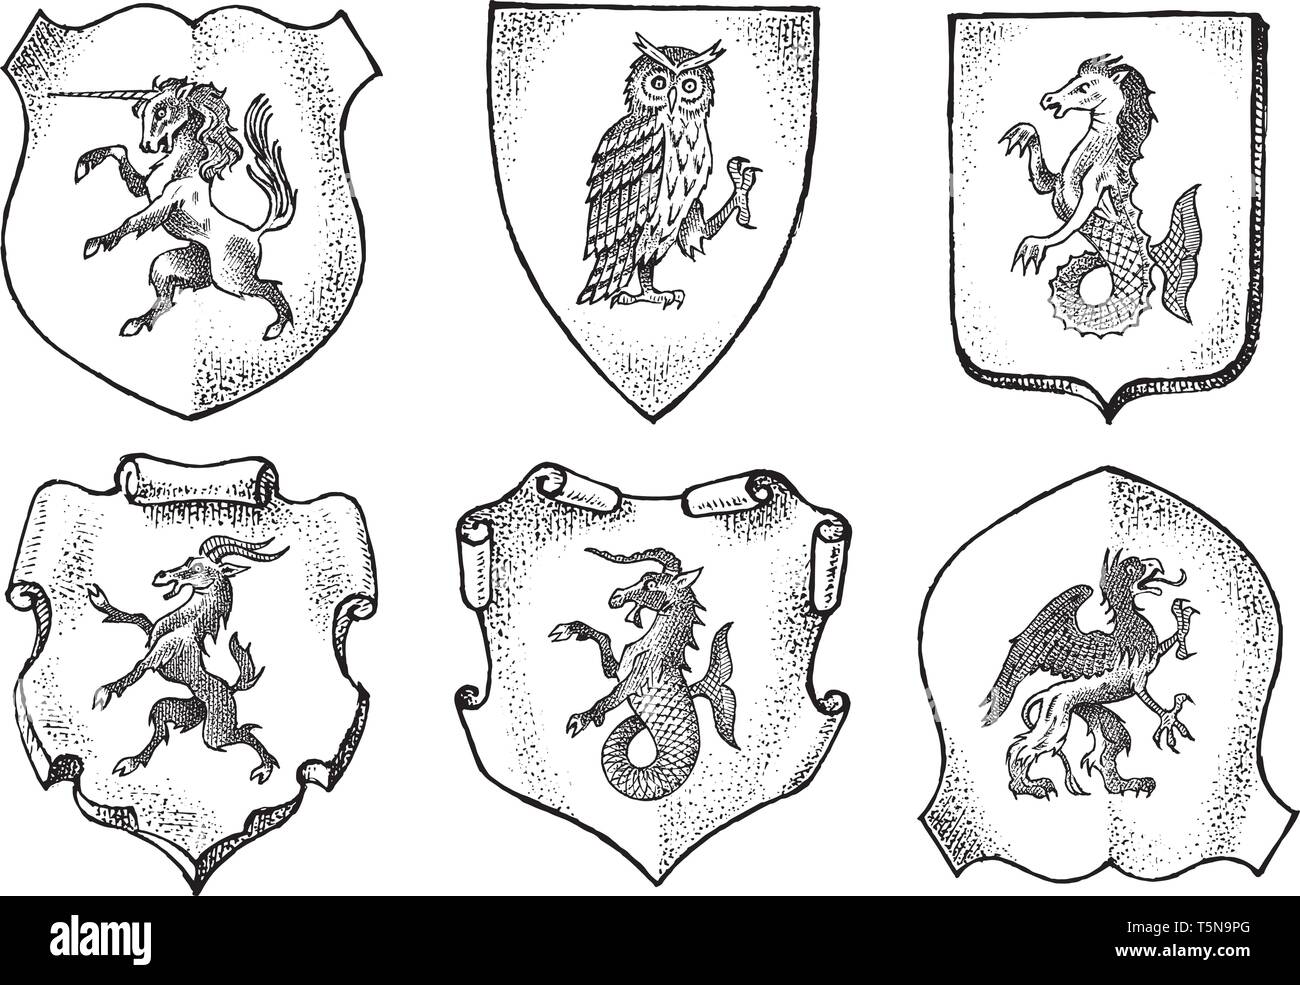 Heraldry in vintage style. Engraved coat of arms with animals, birds, mythical creatures, fish. Medieval Emblems and the logo of the fantasy kingdom. Stock Vector